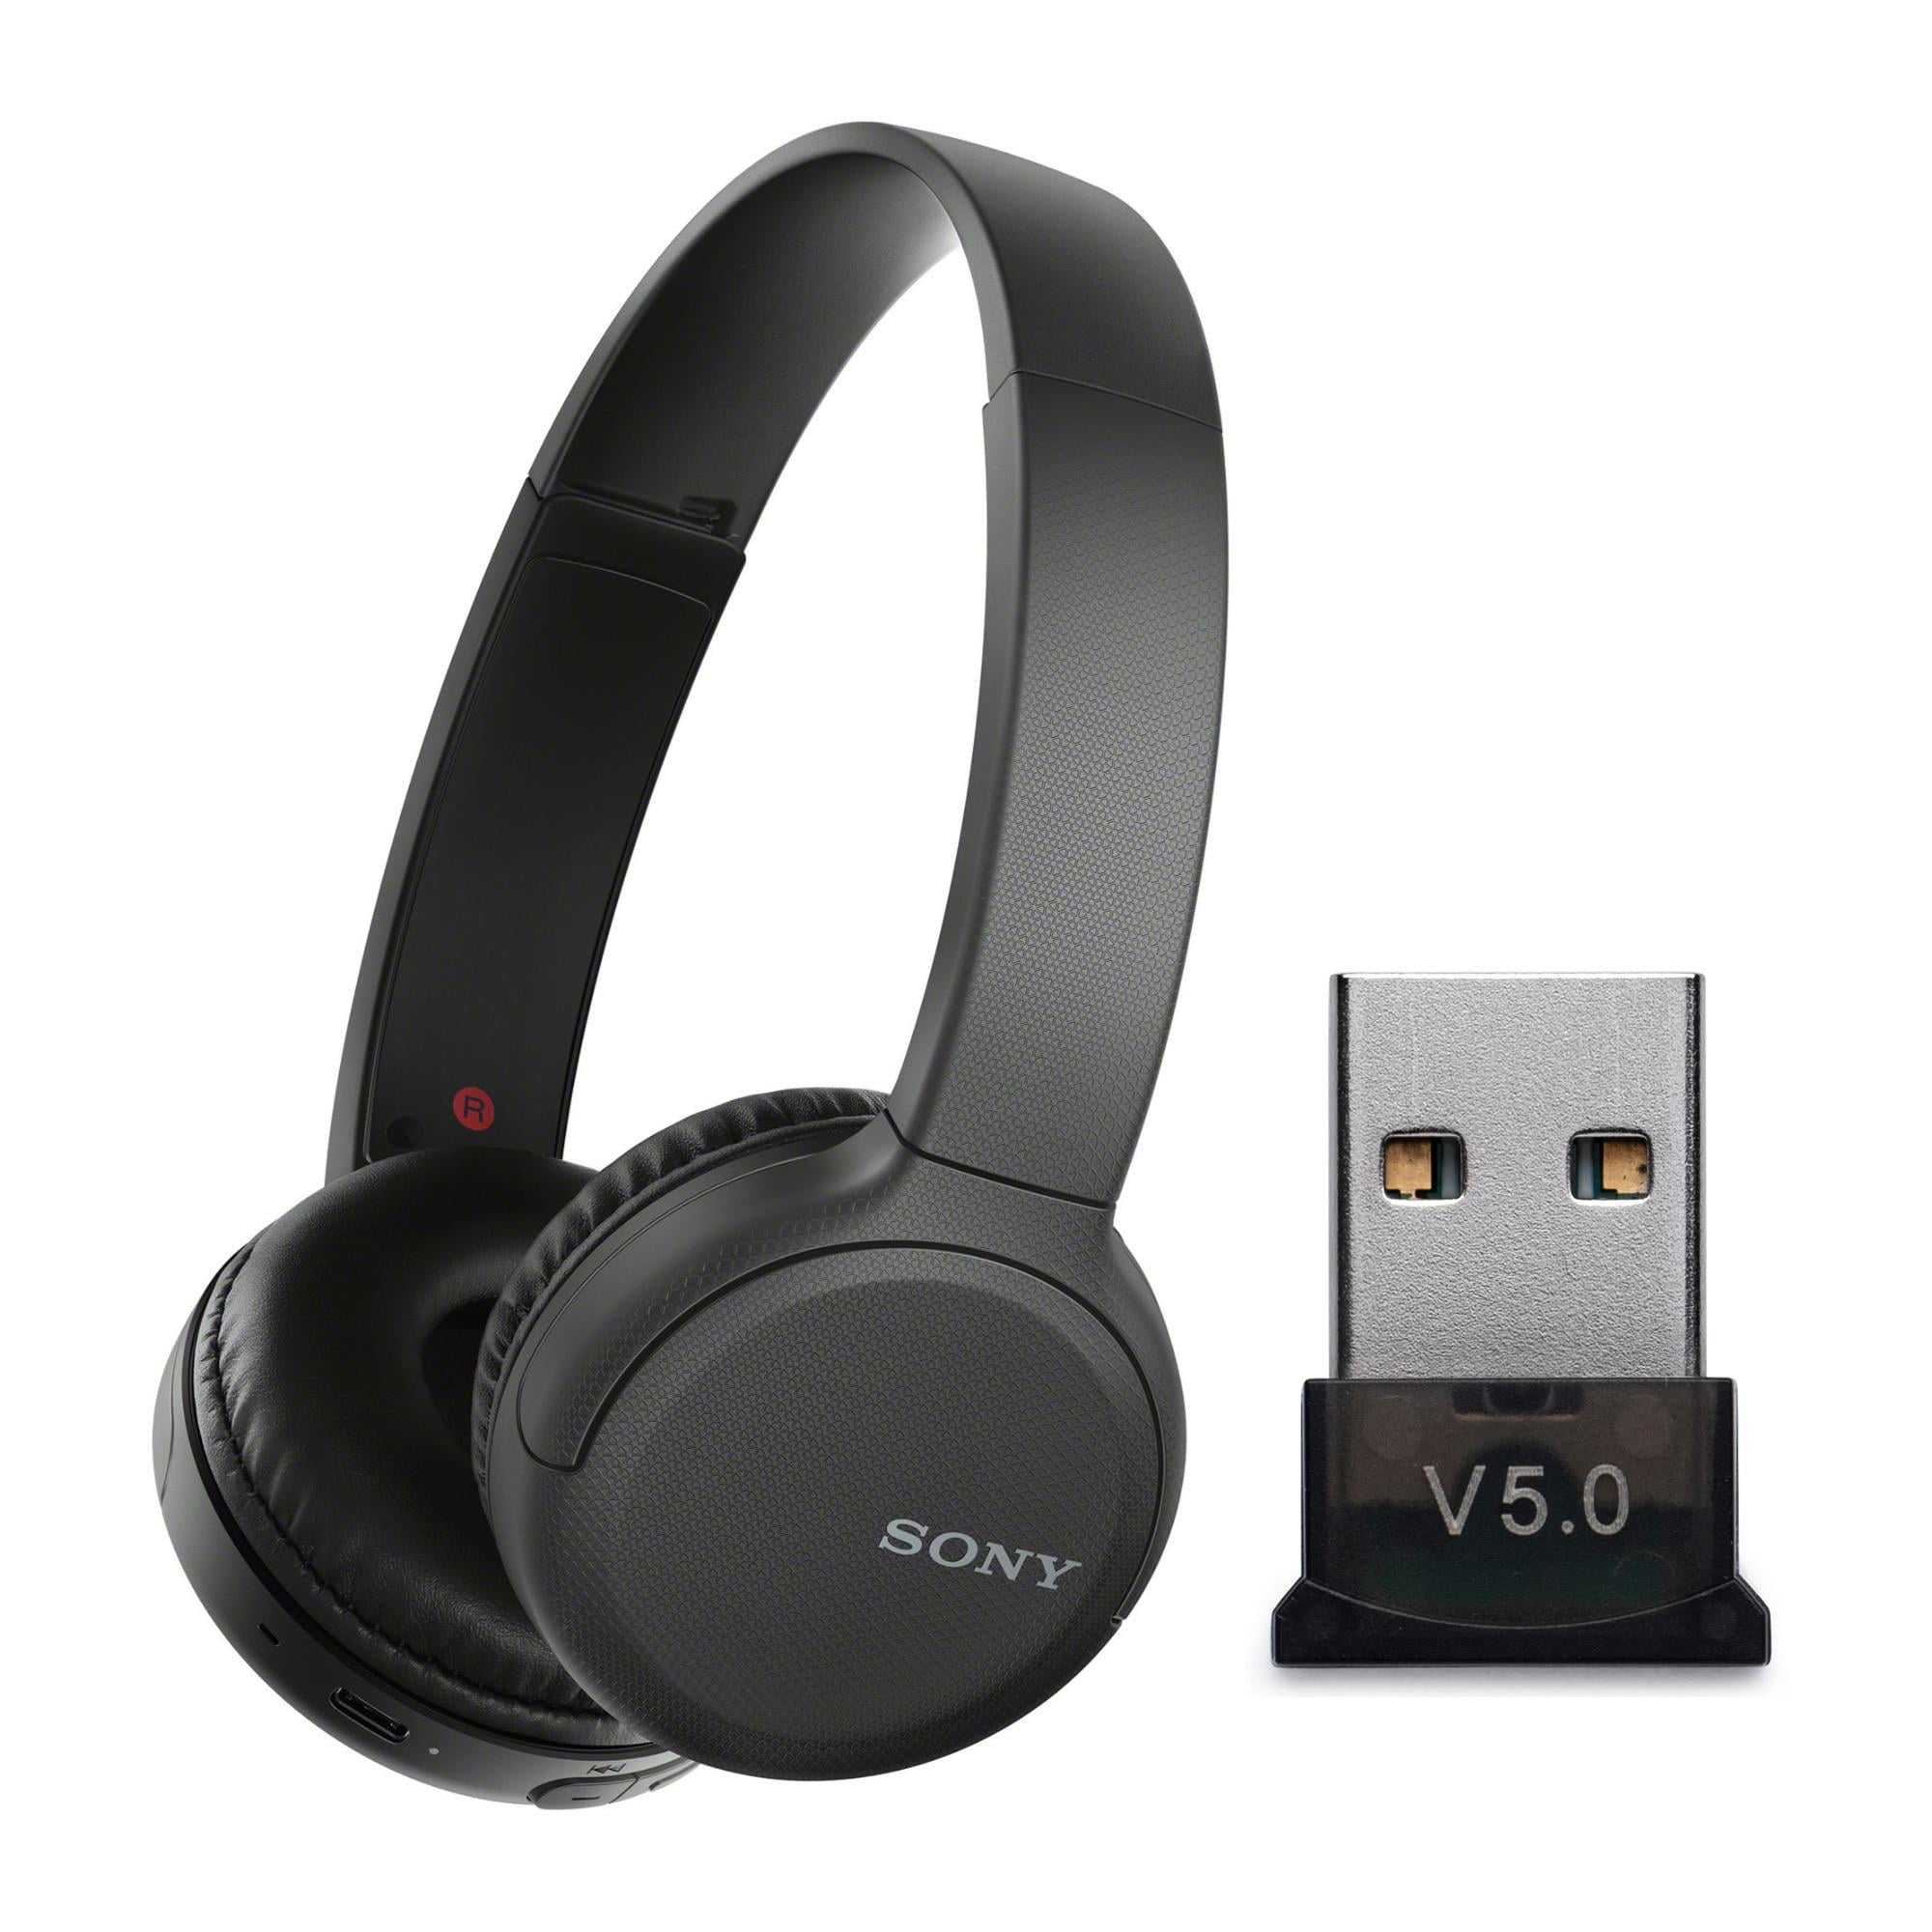 Sony WH-CH510 Wireless On-Ear Headphones with USB Bluetooth Dongle Adapter